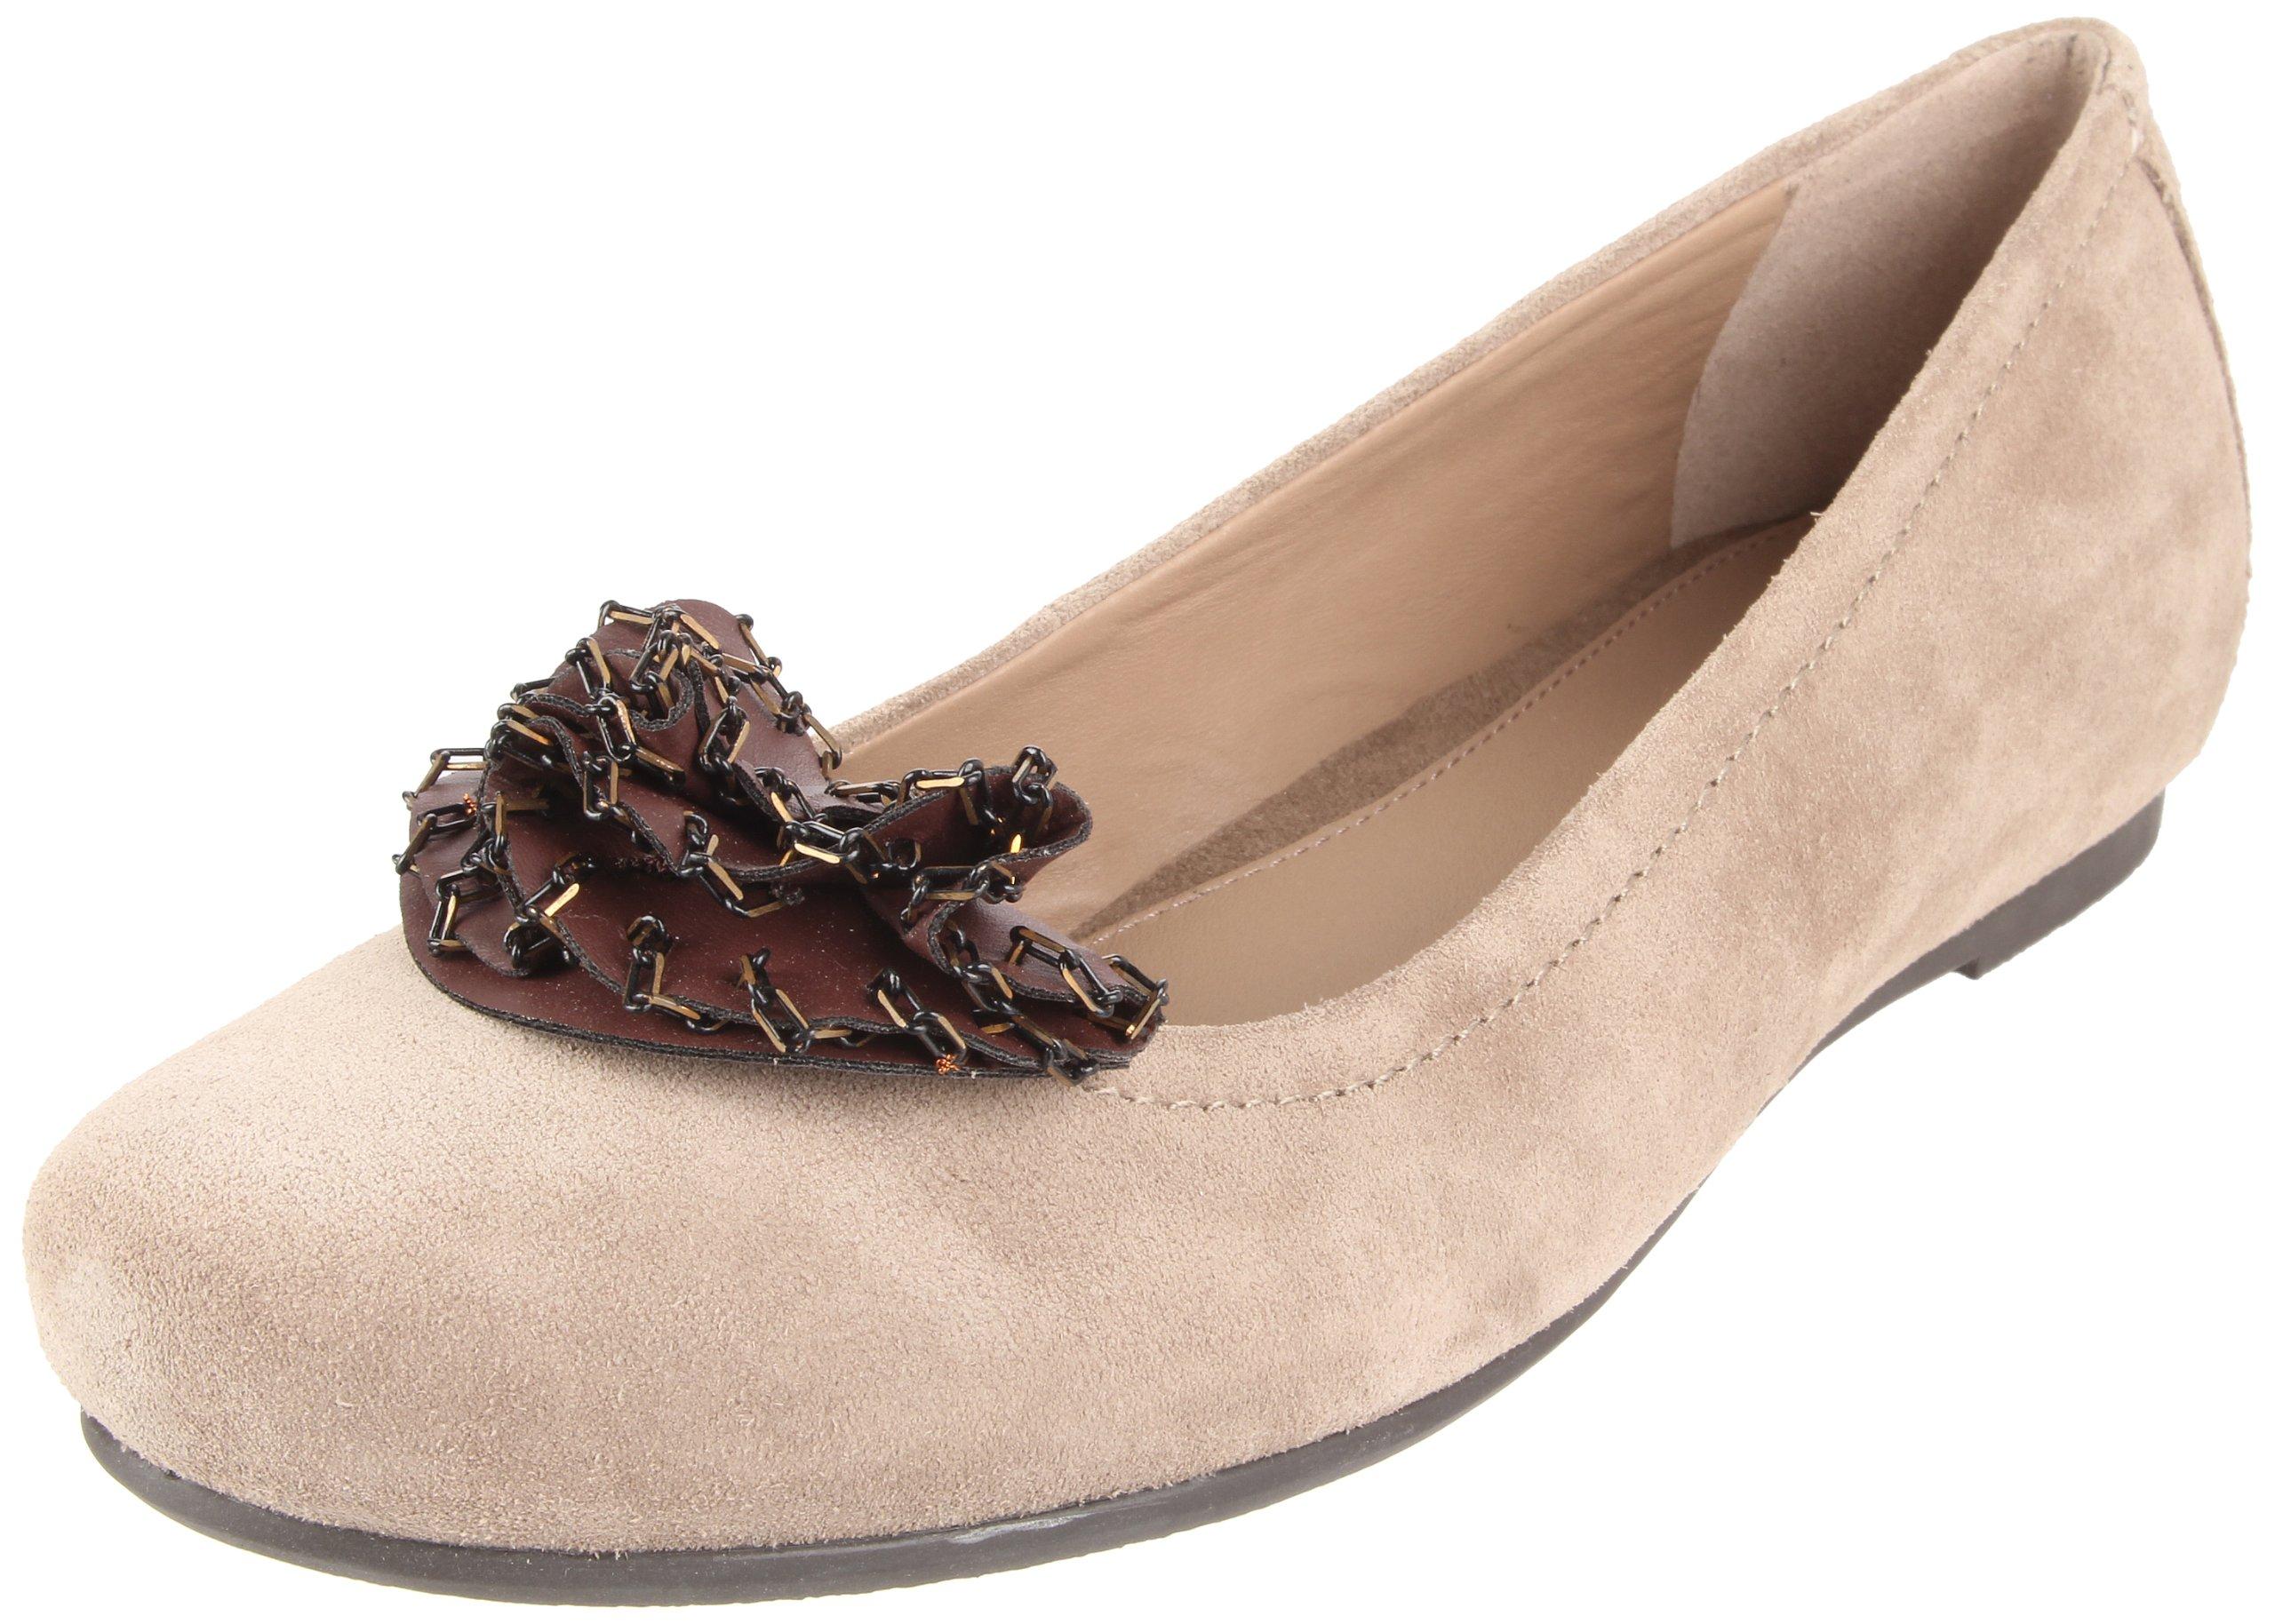 Geox Donna Rylee Mary Jane Flat,sand,36 Eu/6 M Us in Black | Lyst